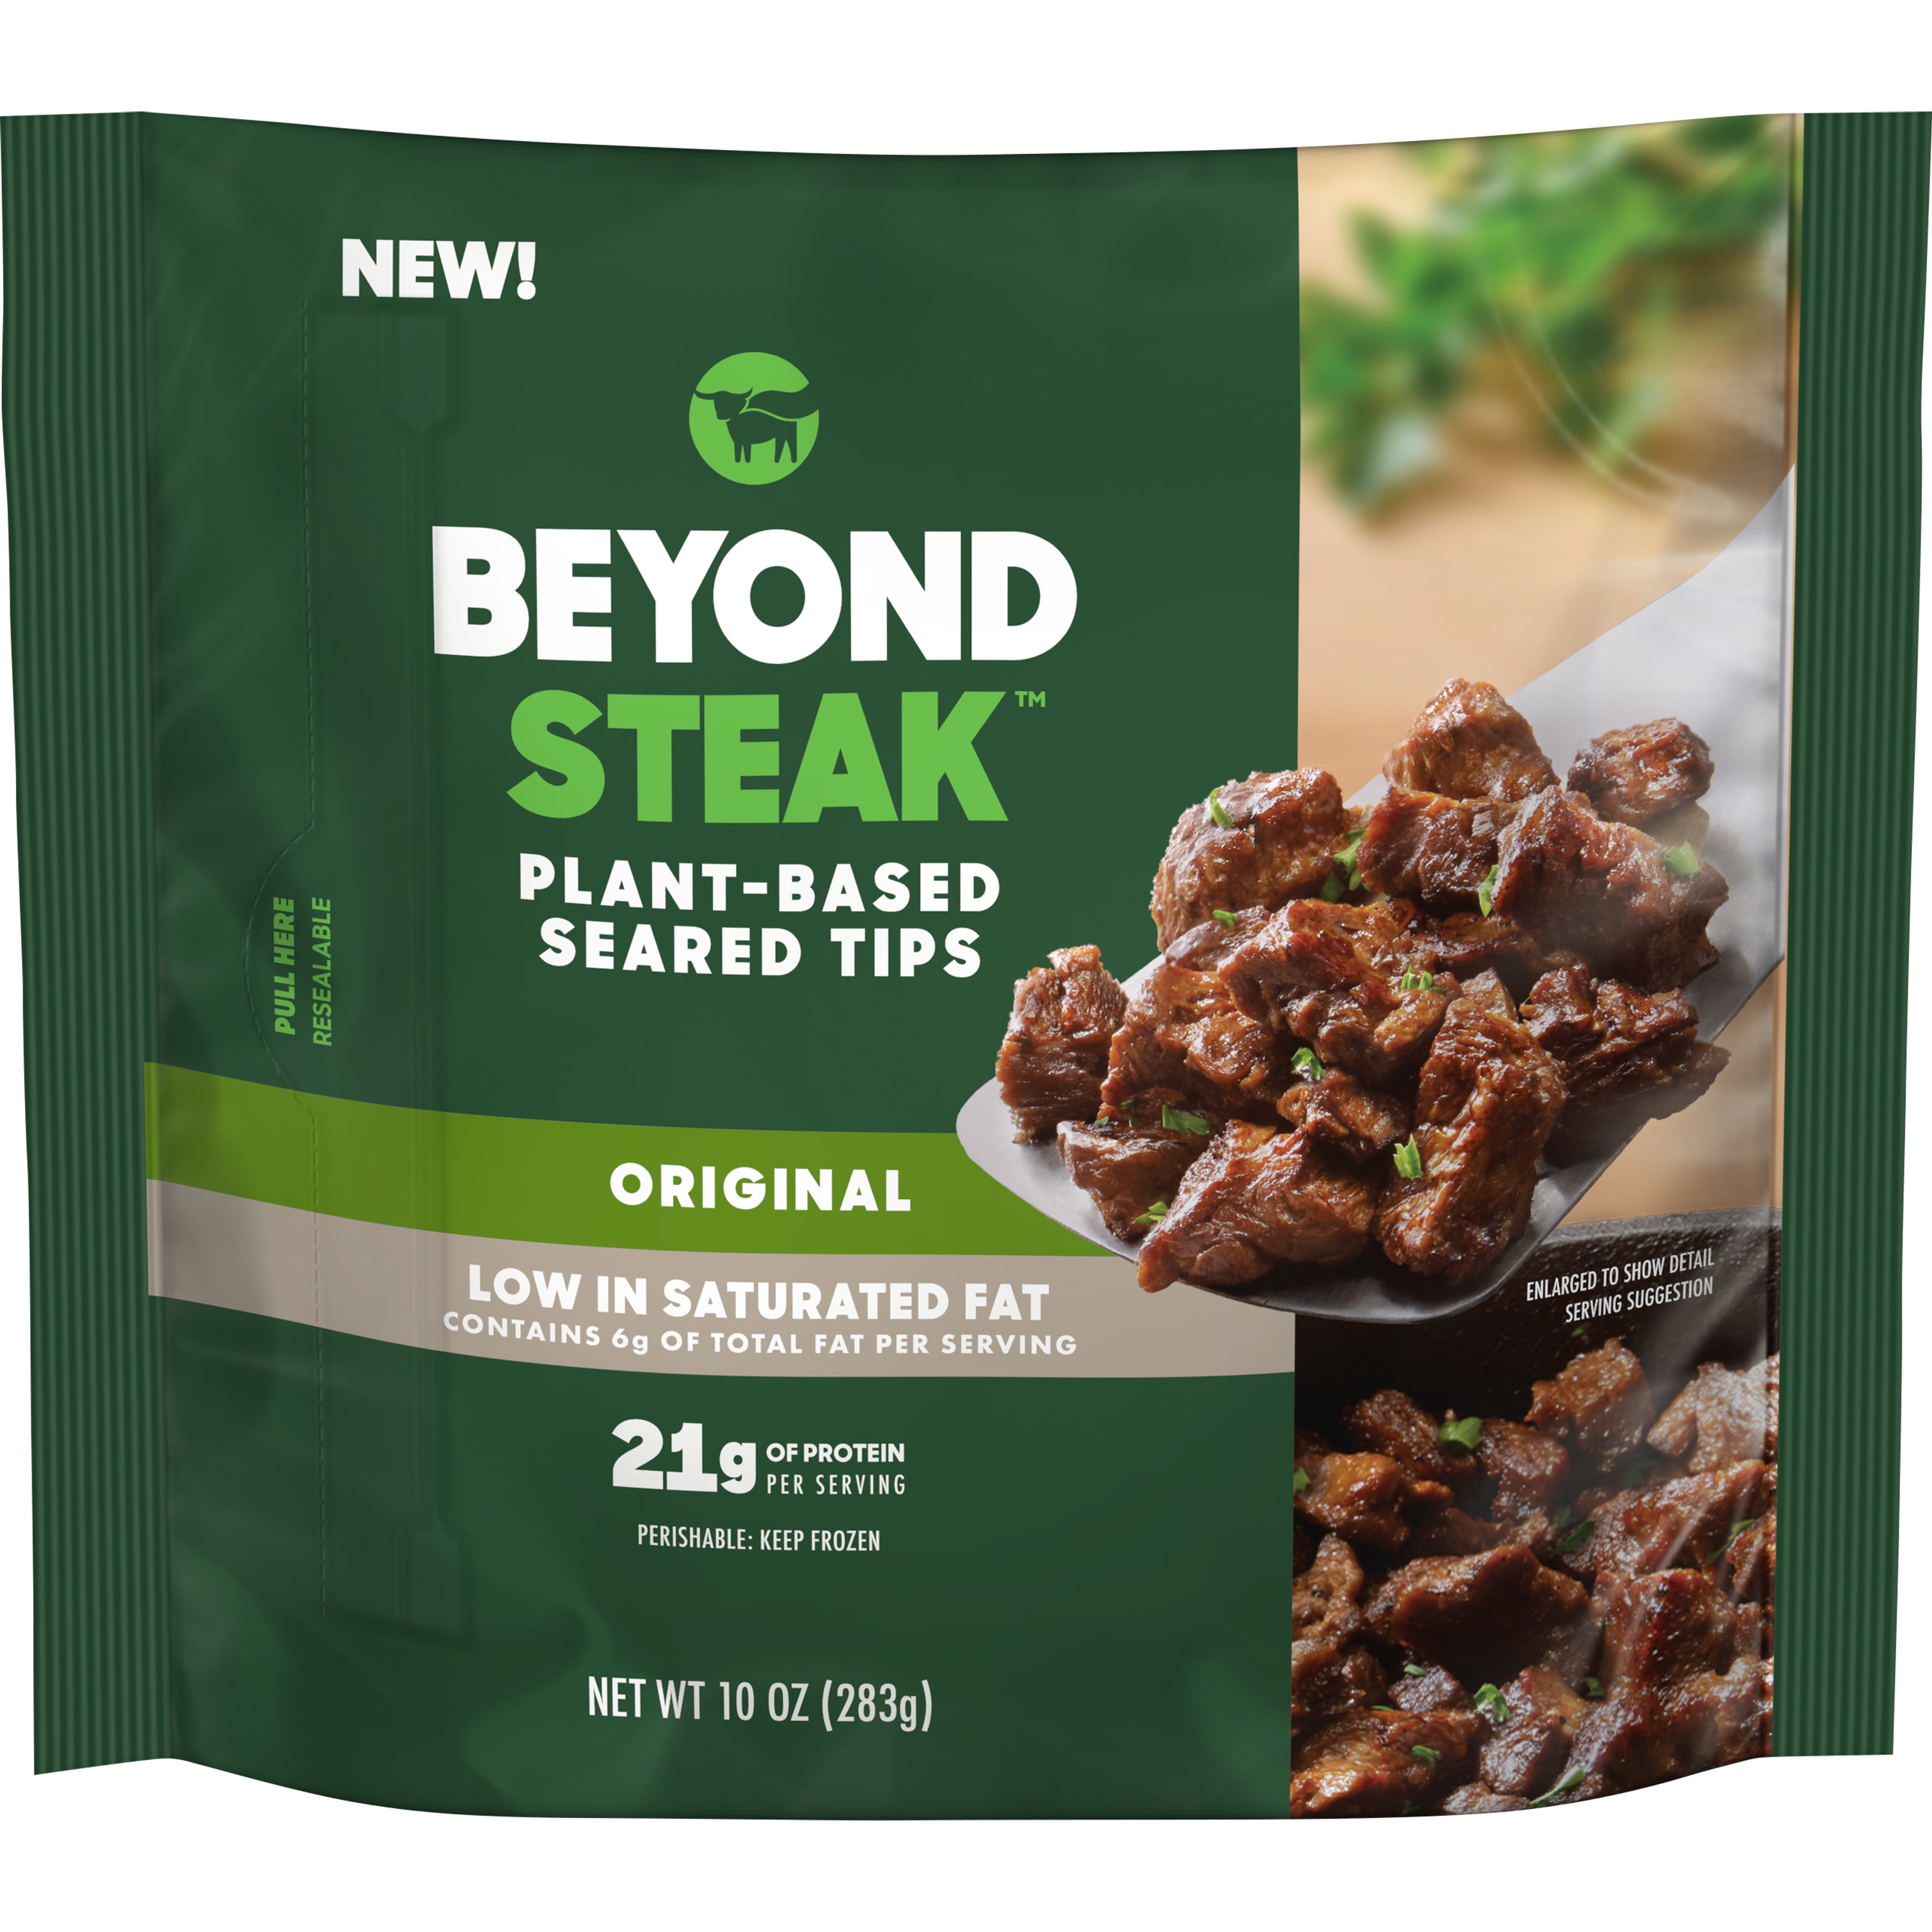 Beyond Meat Beyond Steak Plant-Based Seared Tips 10 oz Packaged Meals (Frozen) - image 1 of 9